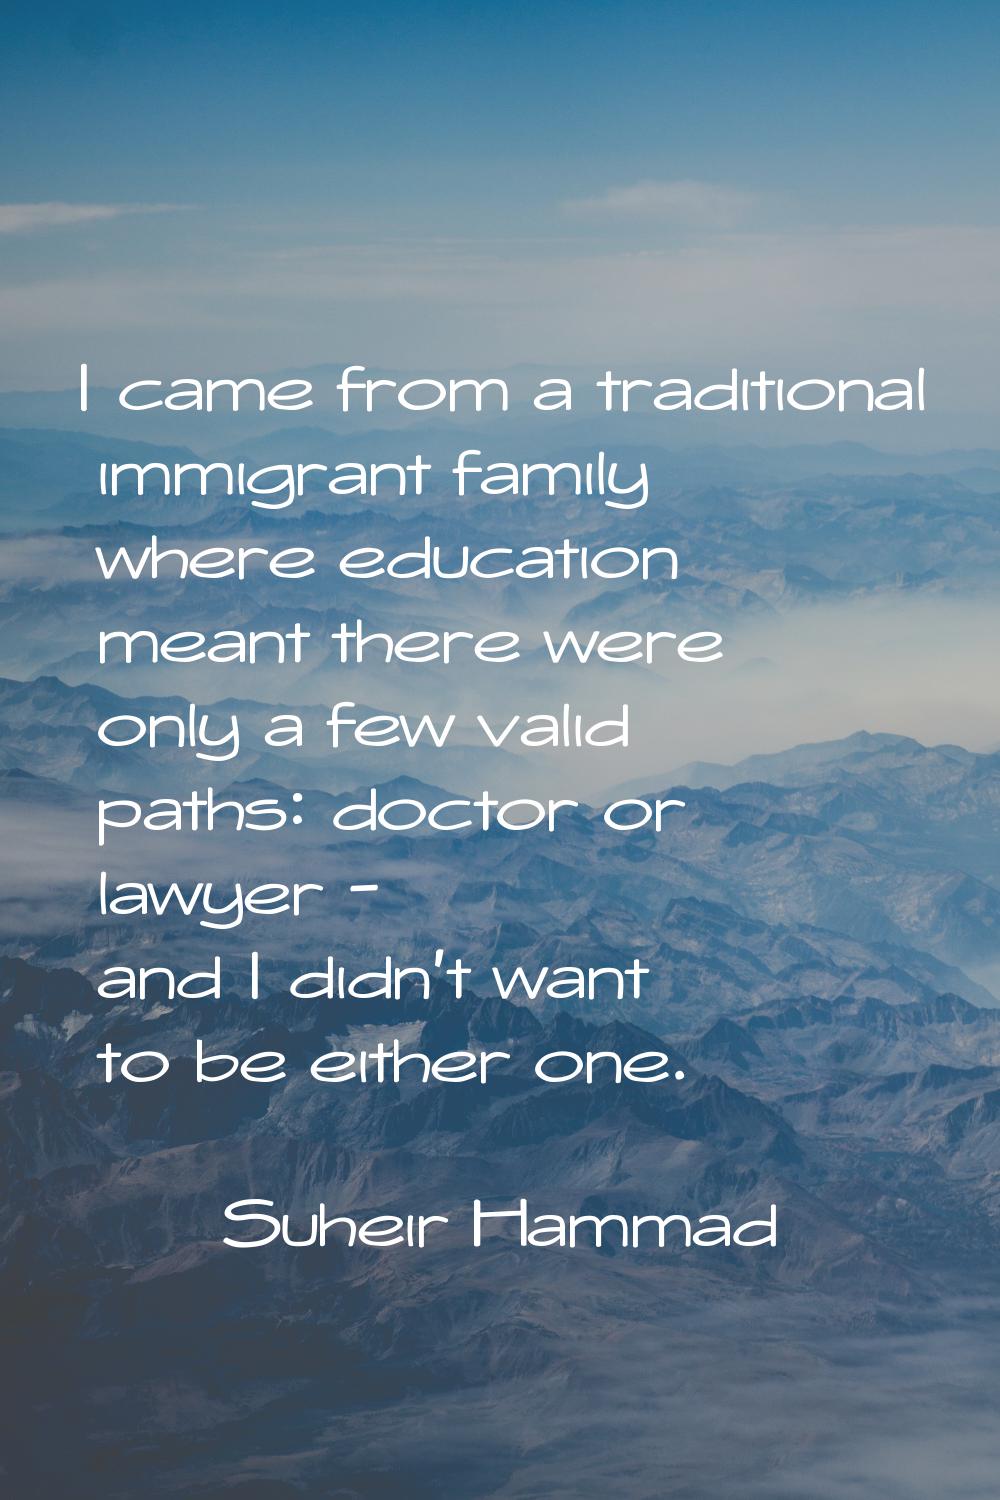 I came from a traditional immigrant family where education meant there were only a few valid paths: